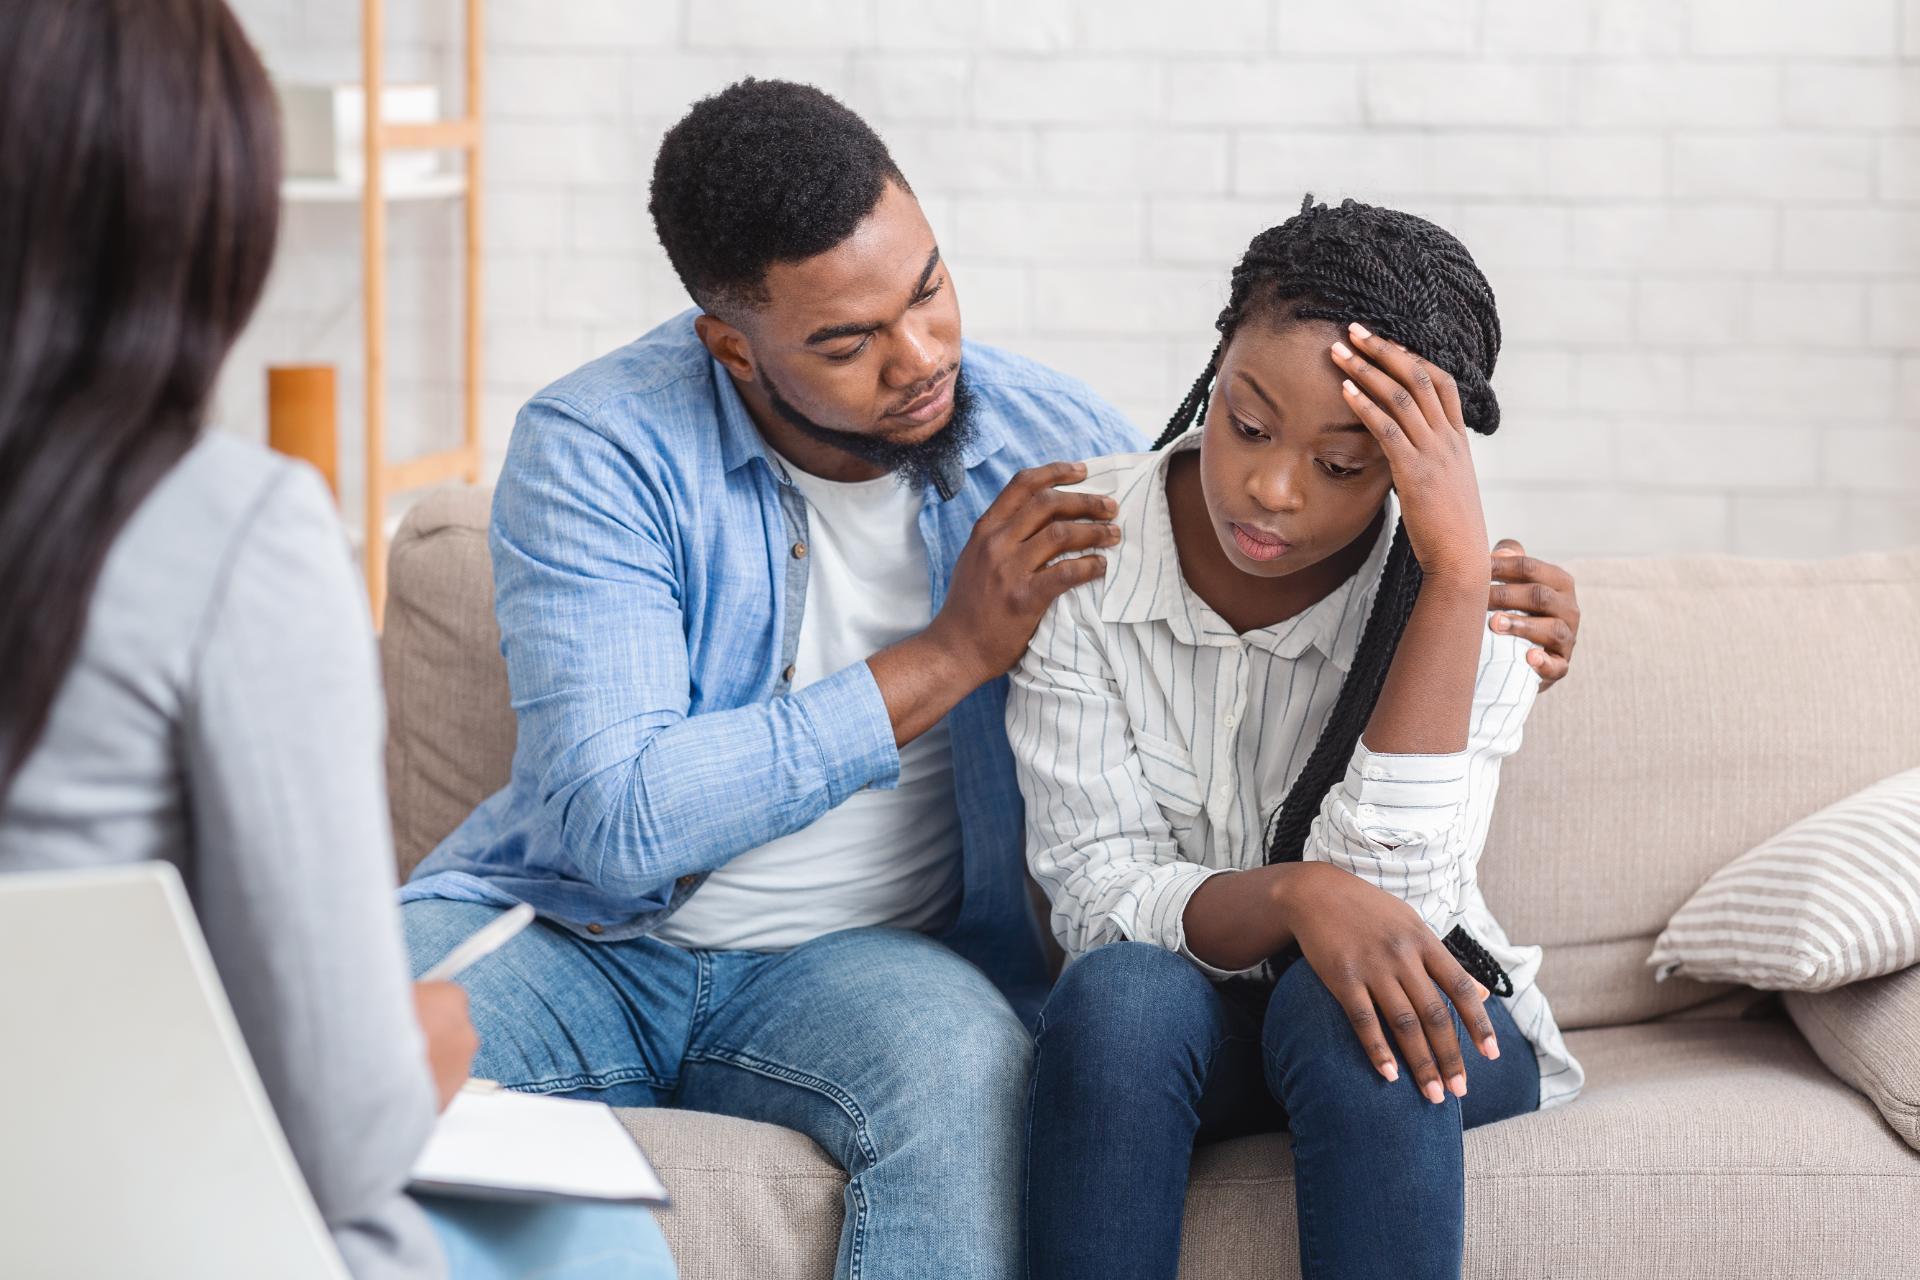 Emotionally focused couples therapy